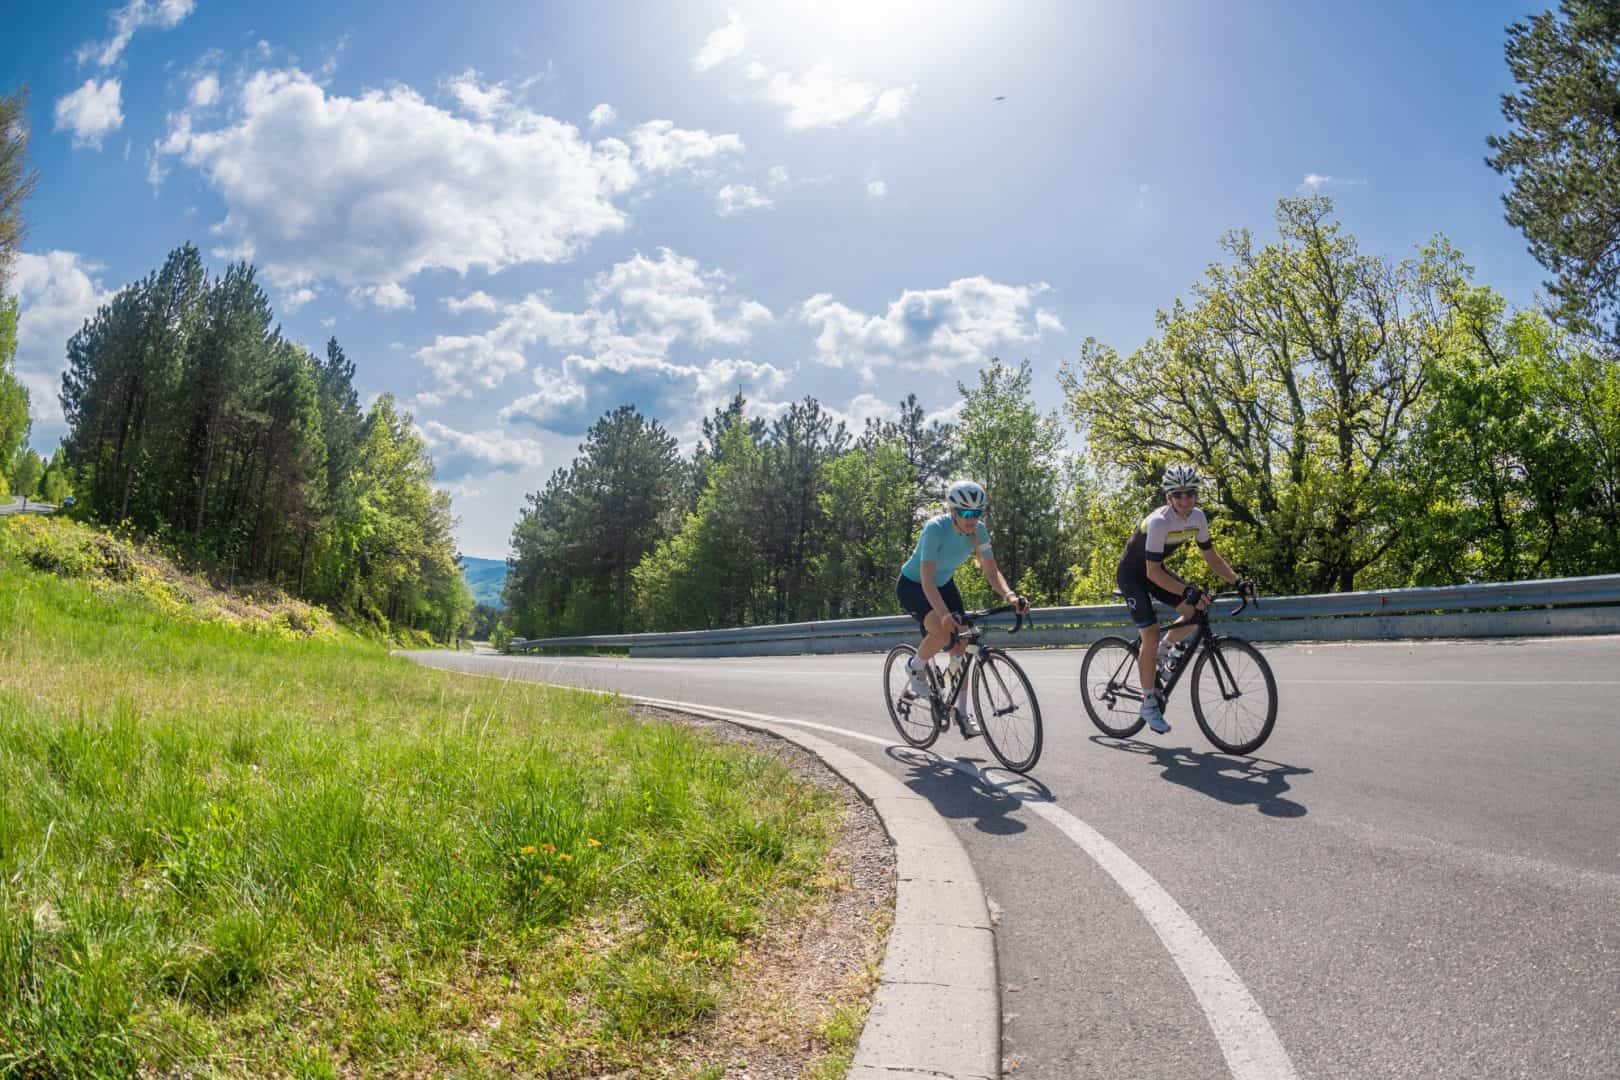 Couple cycling on road bikes in Slovenia. Perfect alpine road. Guided bike tour by RockVelo.